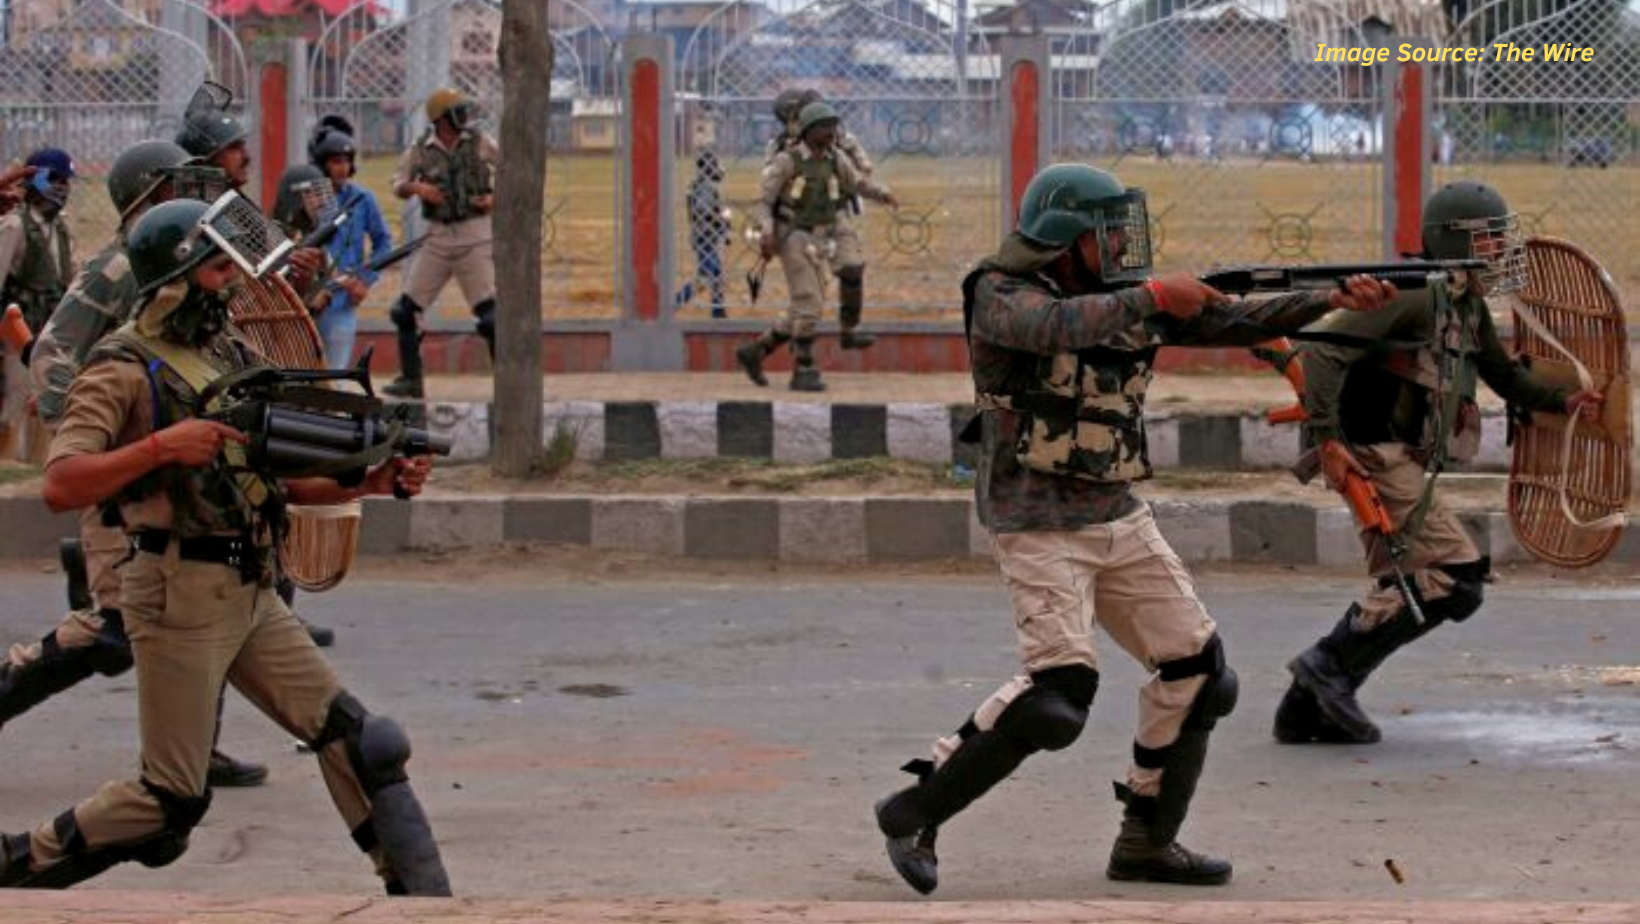 The Upsurge Of Insurgency In South Kashmir And Jammu: The Changing Dynamics